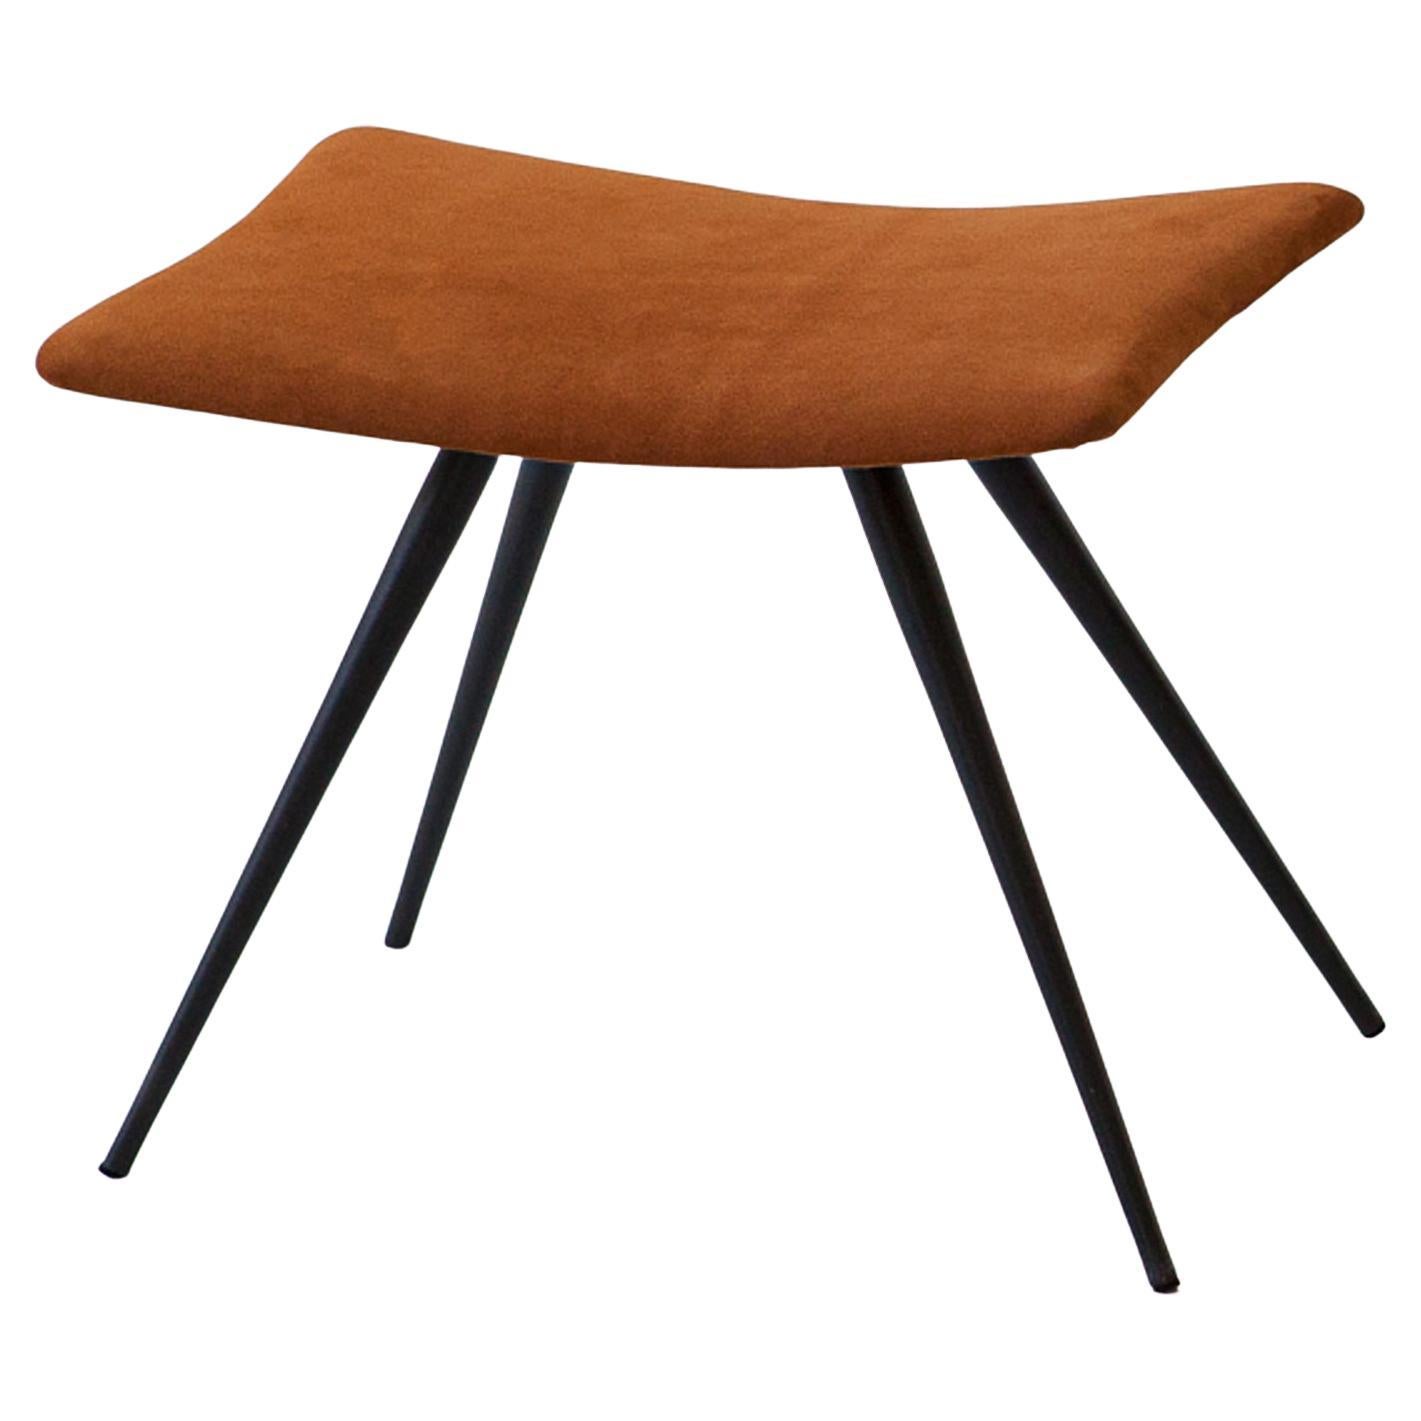 Italian Stool in Cognac Suede Leather and Black Steel Conical Legs, 1950s